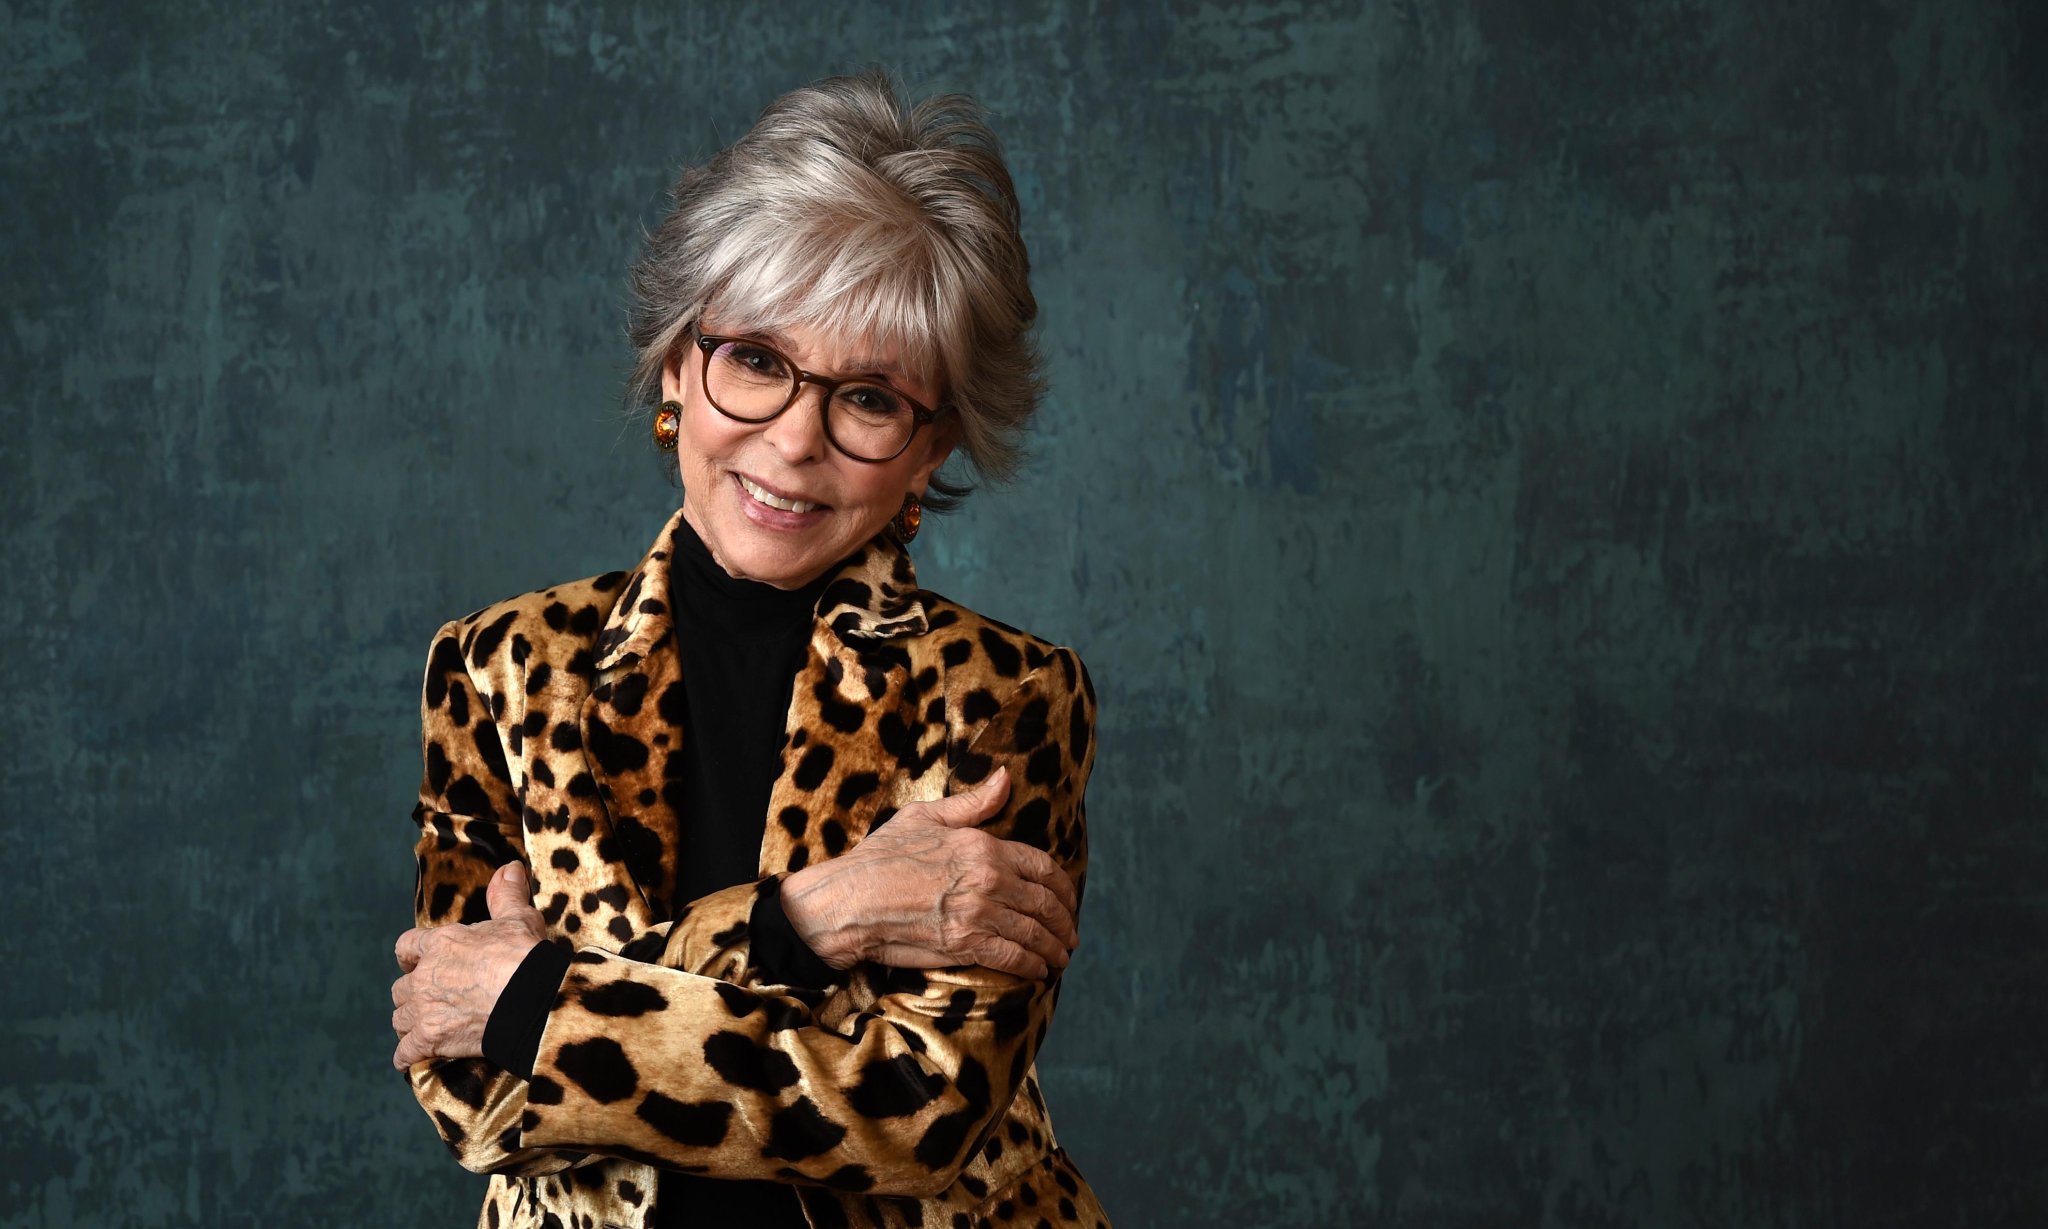 ‘I owe an enormous debt to therapy!’ Rita Moreno on West Side Story, dating Brando and joy at 90